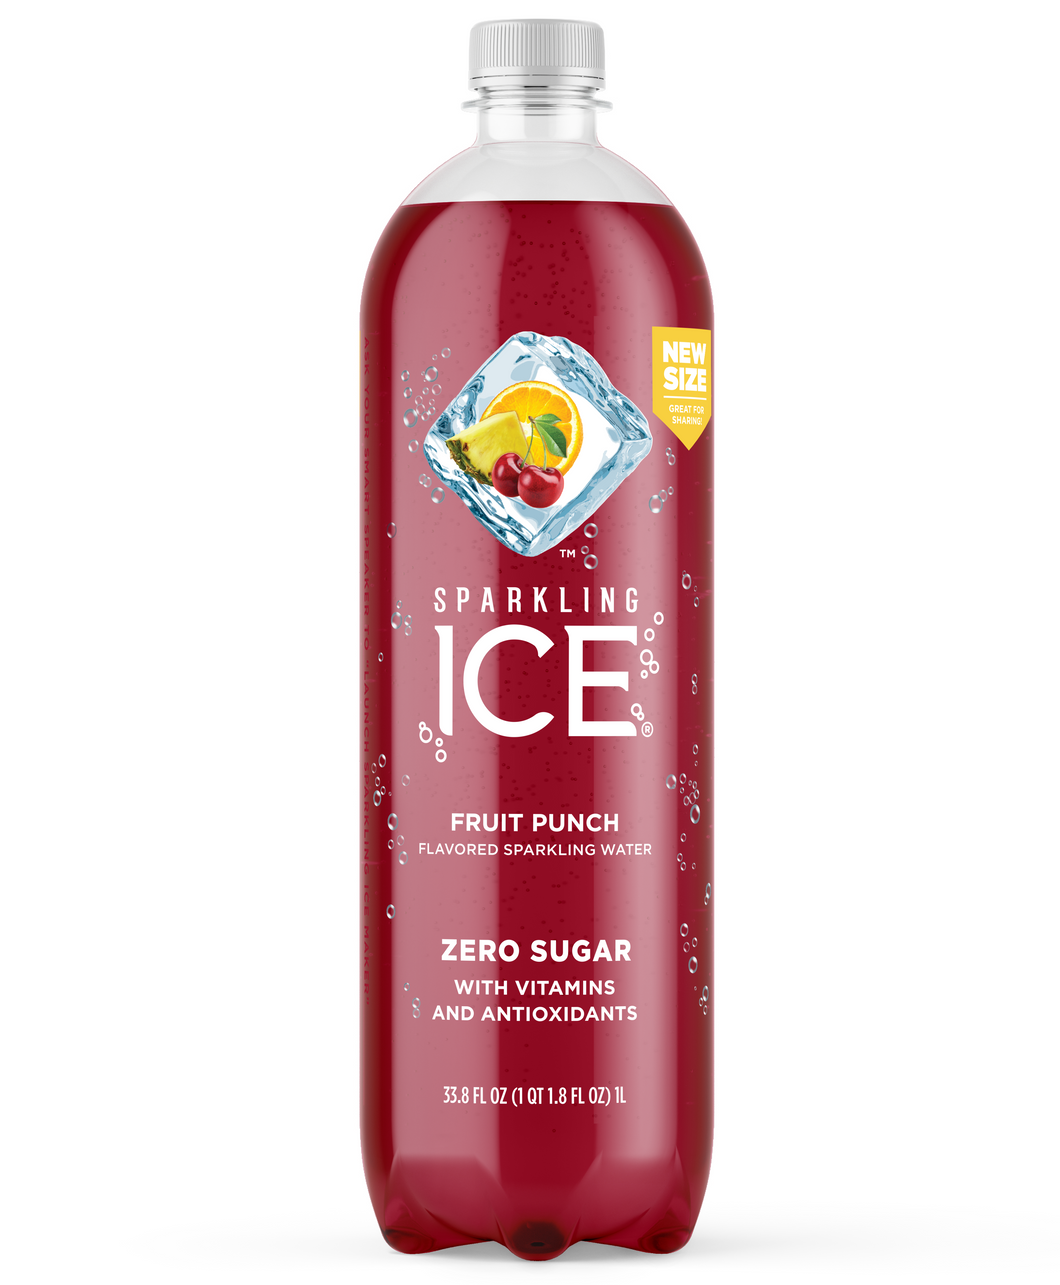 Sparkling Ice Flavored Sparkling Water, Fruit Punch, 1 Liter (Pack of 6)